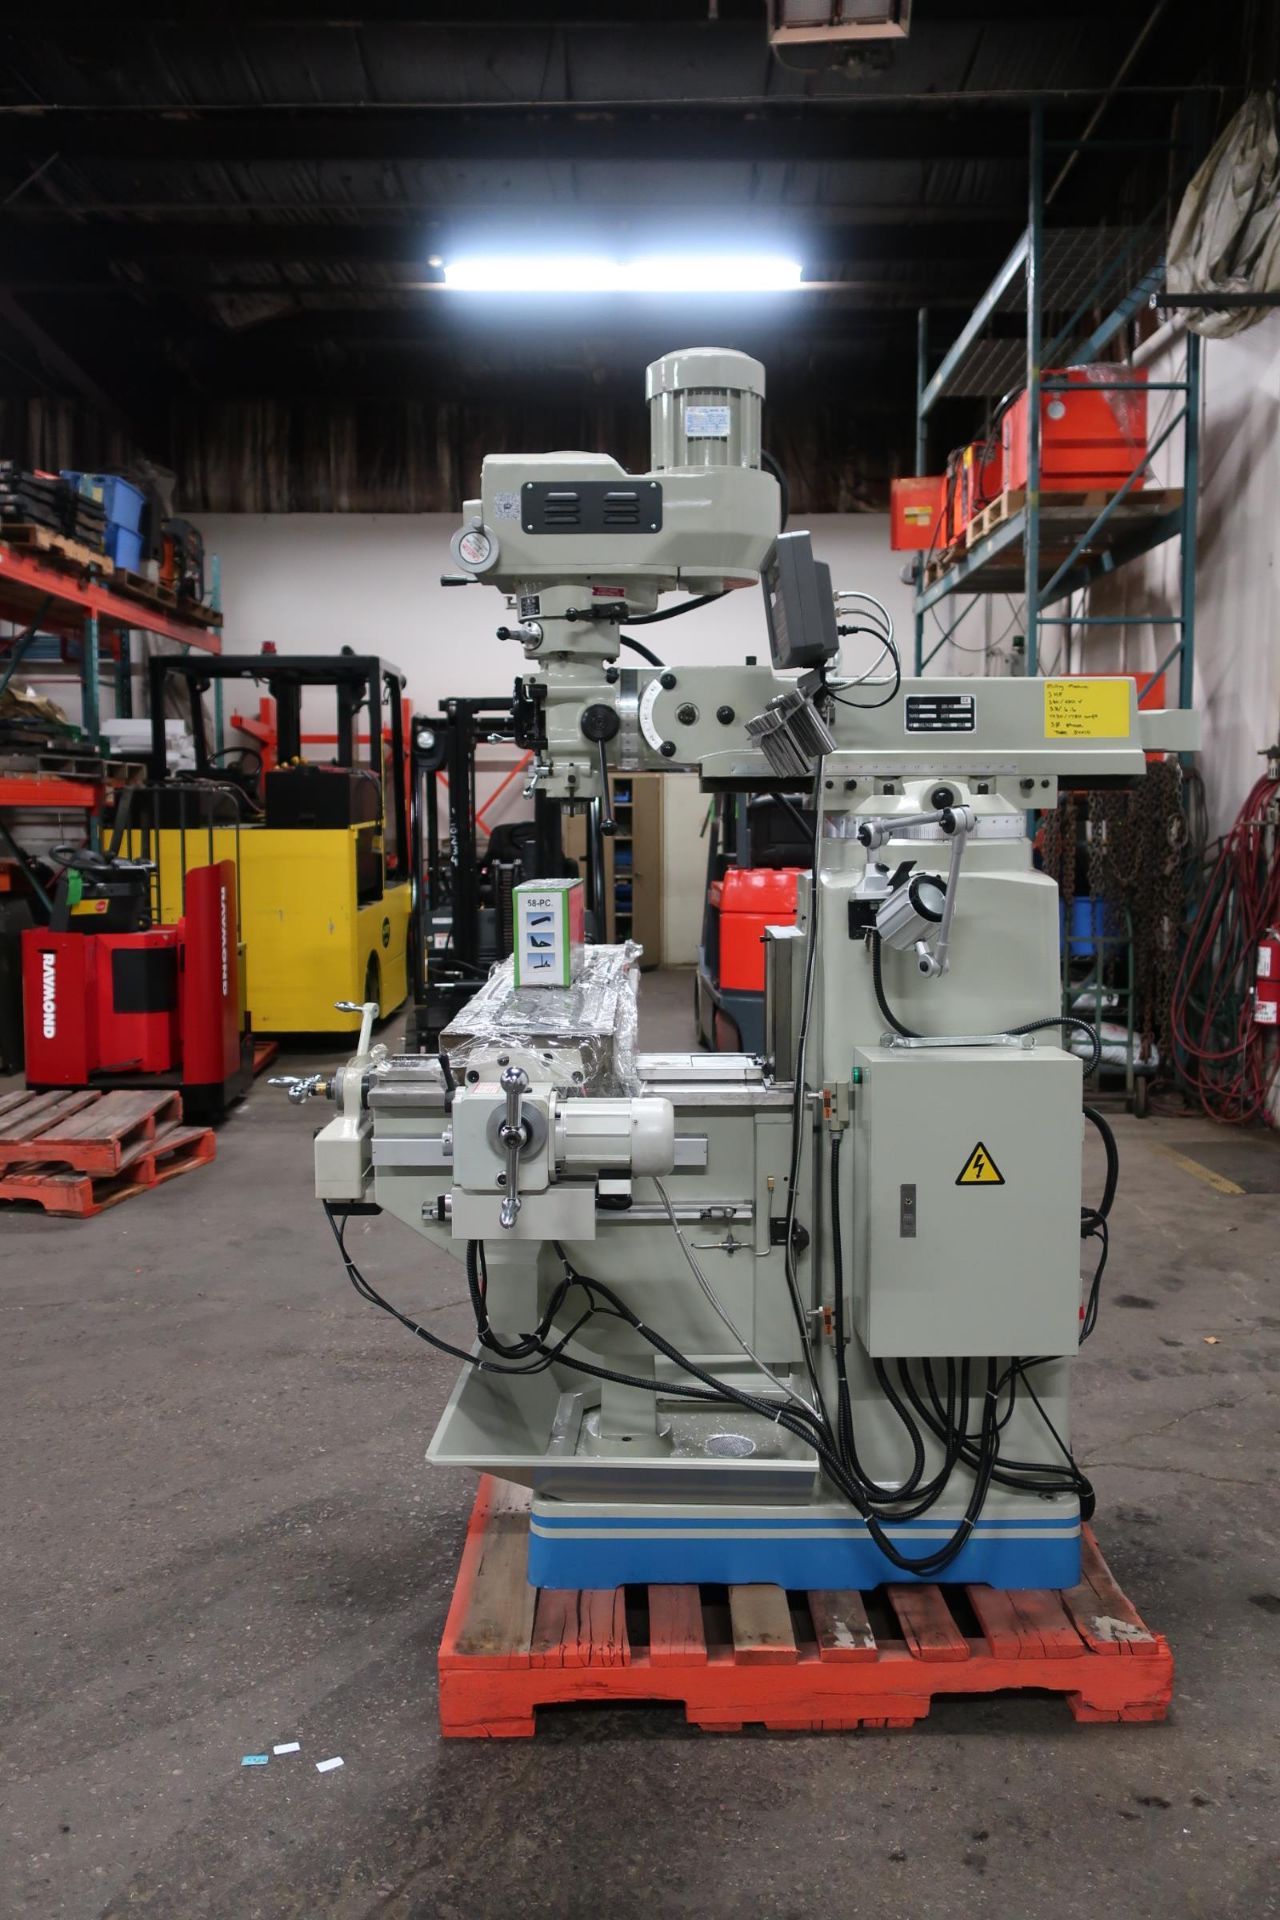 Bernardo MINT / UNUSED Milling Machine with Full Power Feed Table on ALL AXIS (X, Y and Z) 54" x 10" - Image 3 of 3